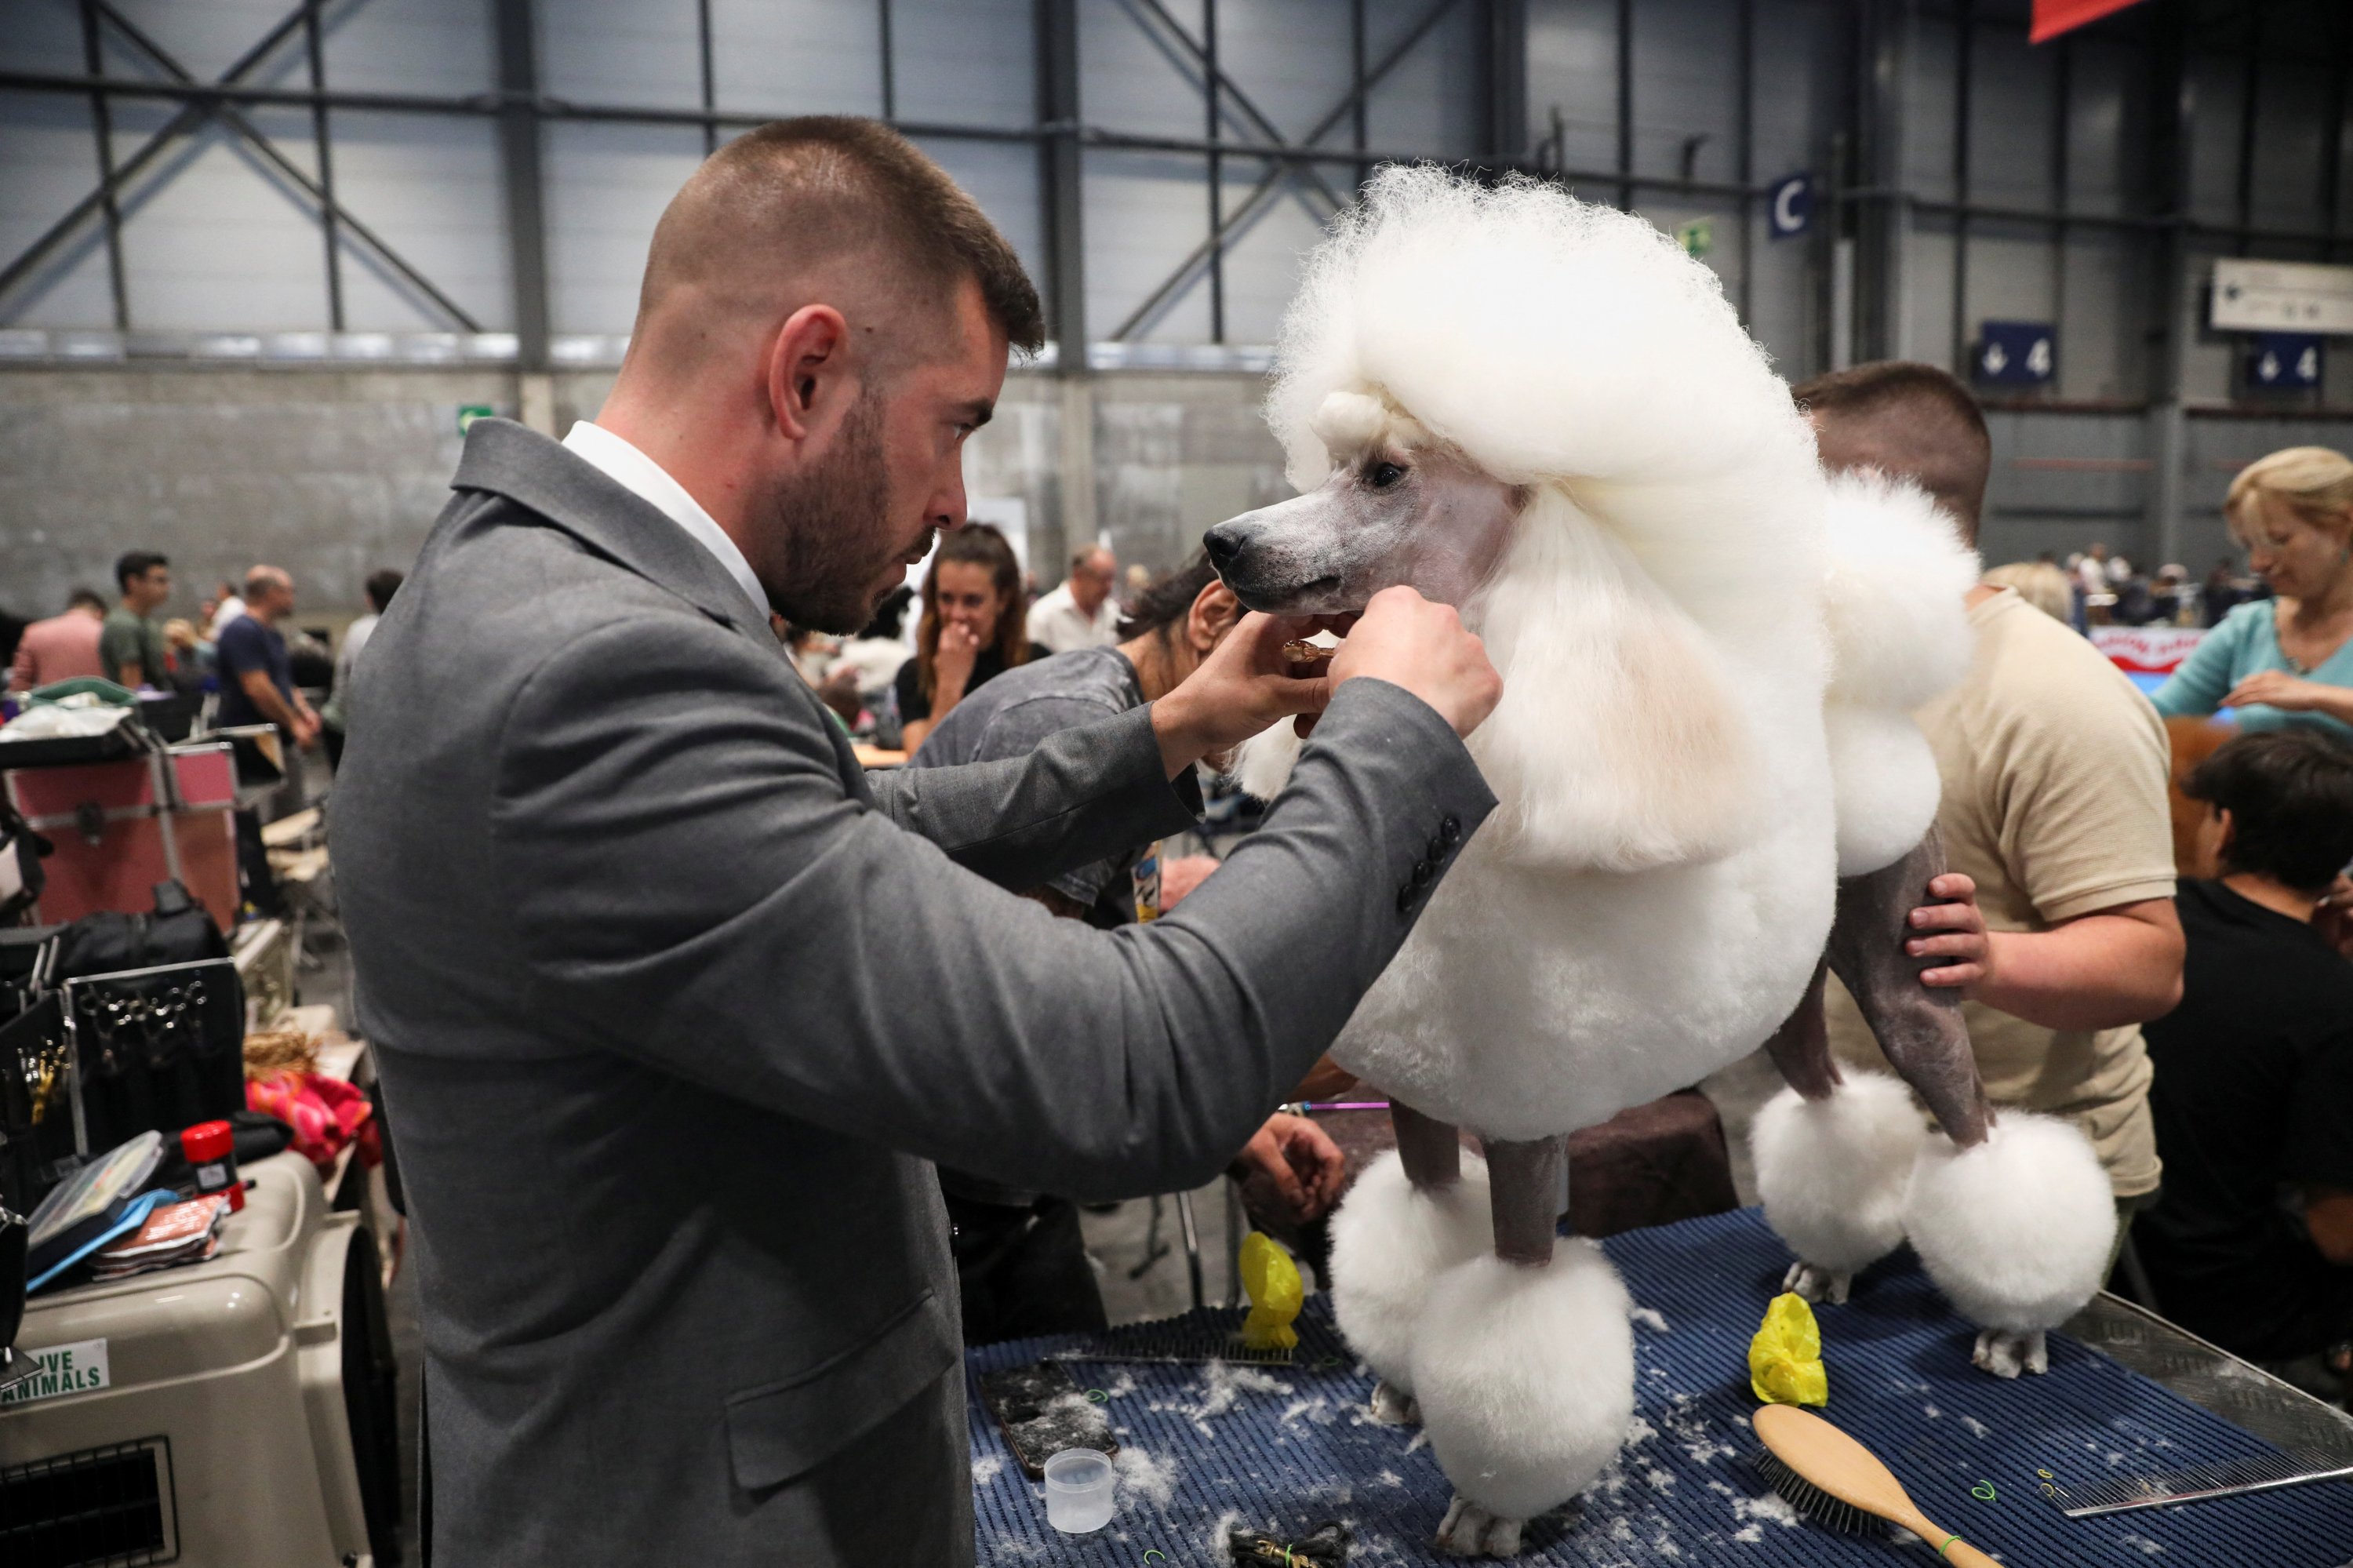 A man grooms his standard poodle at the World Dog Show 2022, which more than 15,000 dogs from around the world are expected to attend, at the IFEMA conference center in Madrid, Spain June 23, 2022. (Photo Reuters)